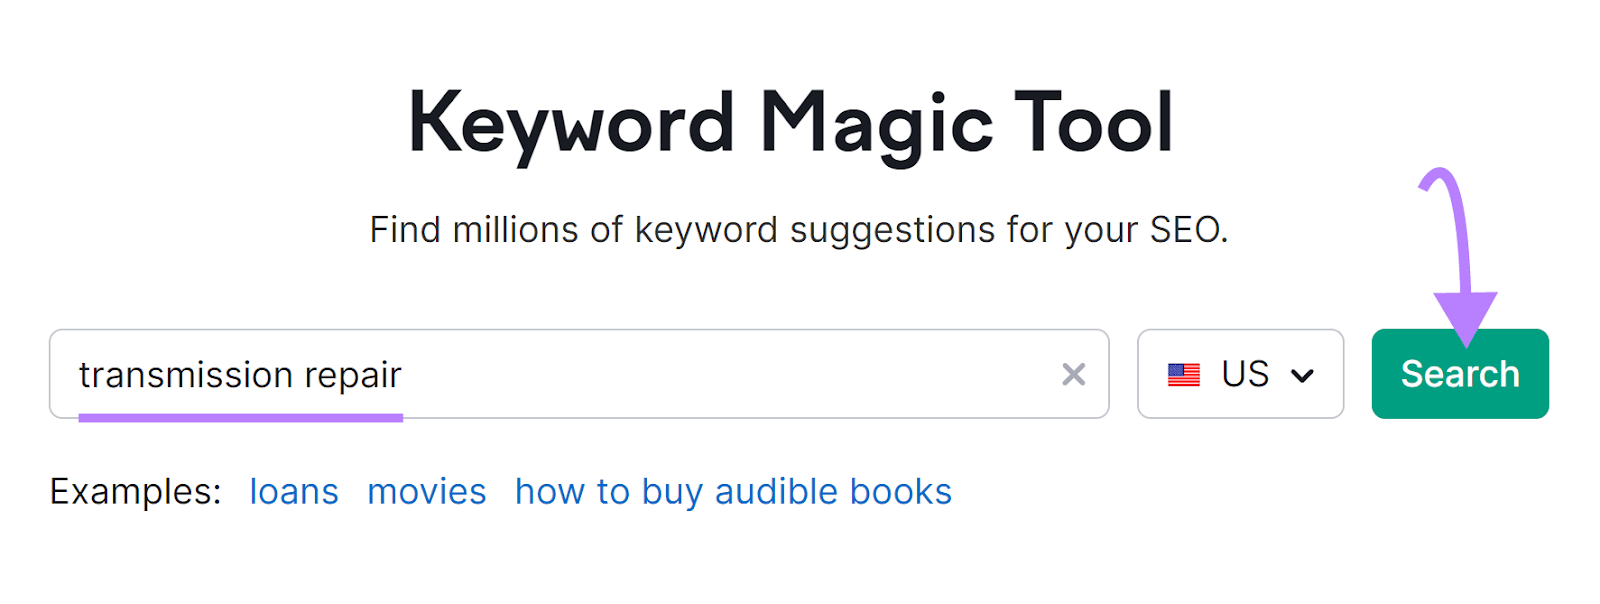 "transmission repair" entered into the Keyword Magic Tool search bar